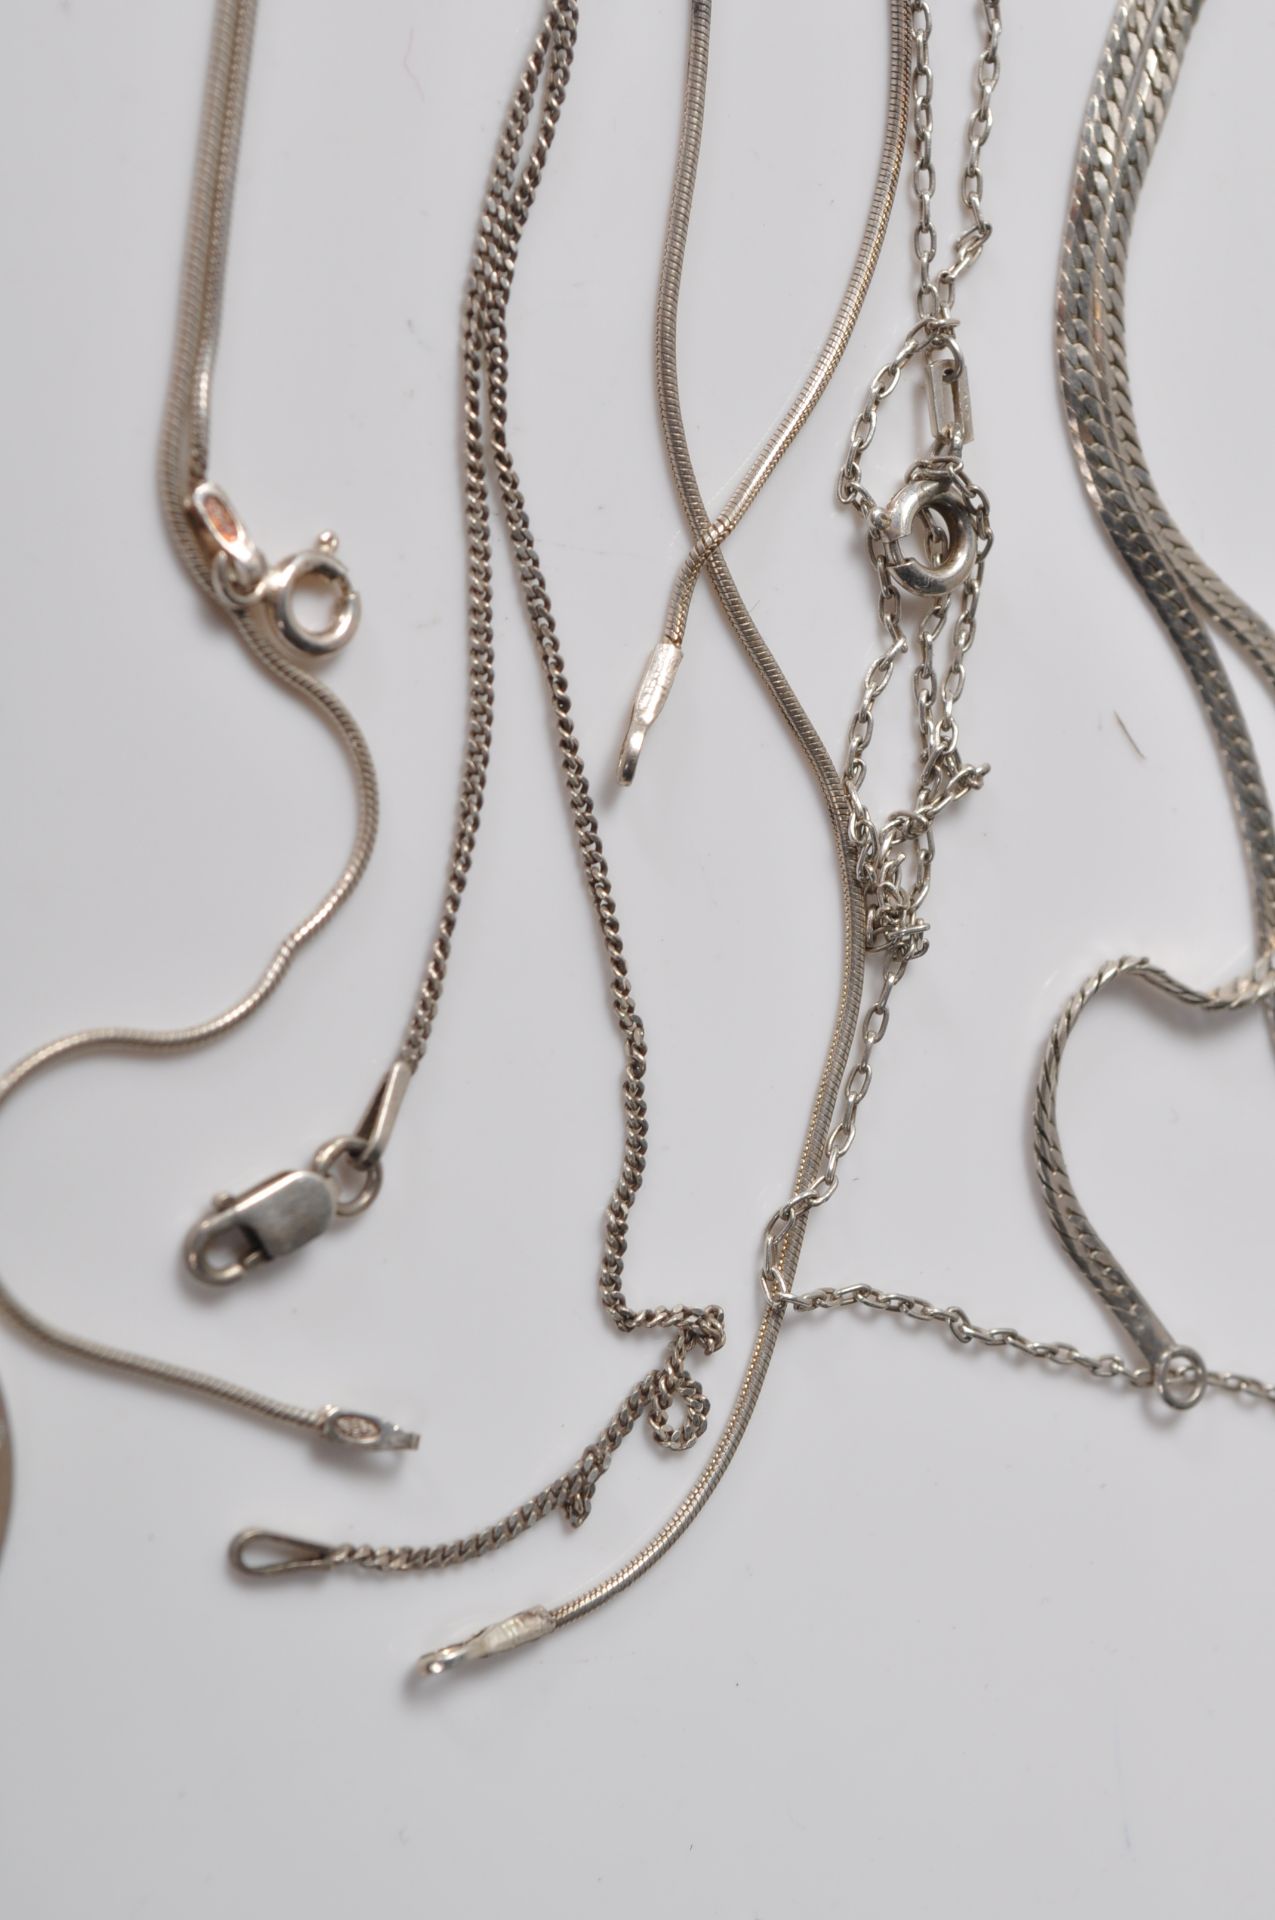 COLLECTION OF SILVER STAMPED 925 NECKLACES. - Image 5 of 10